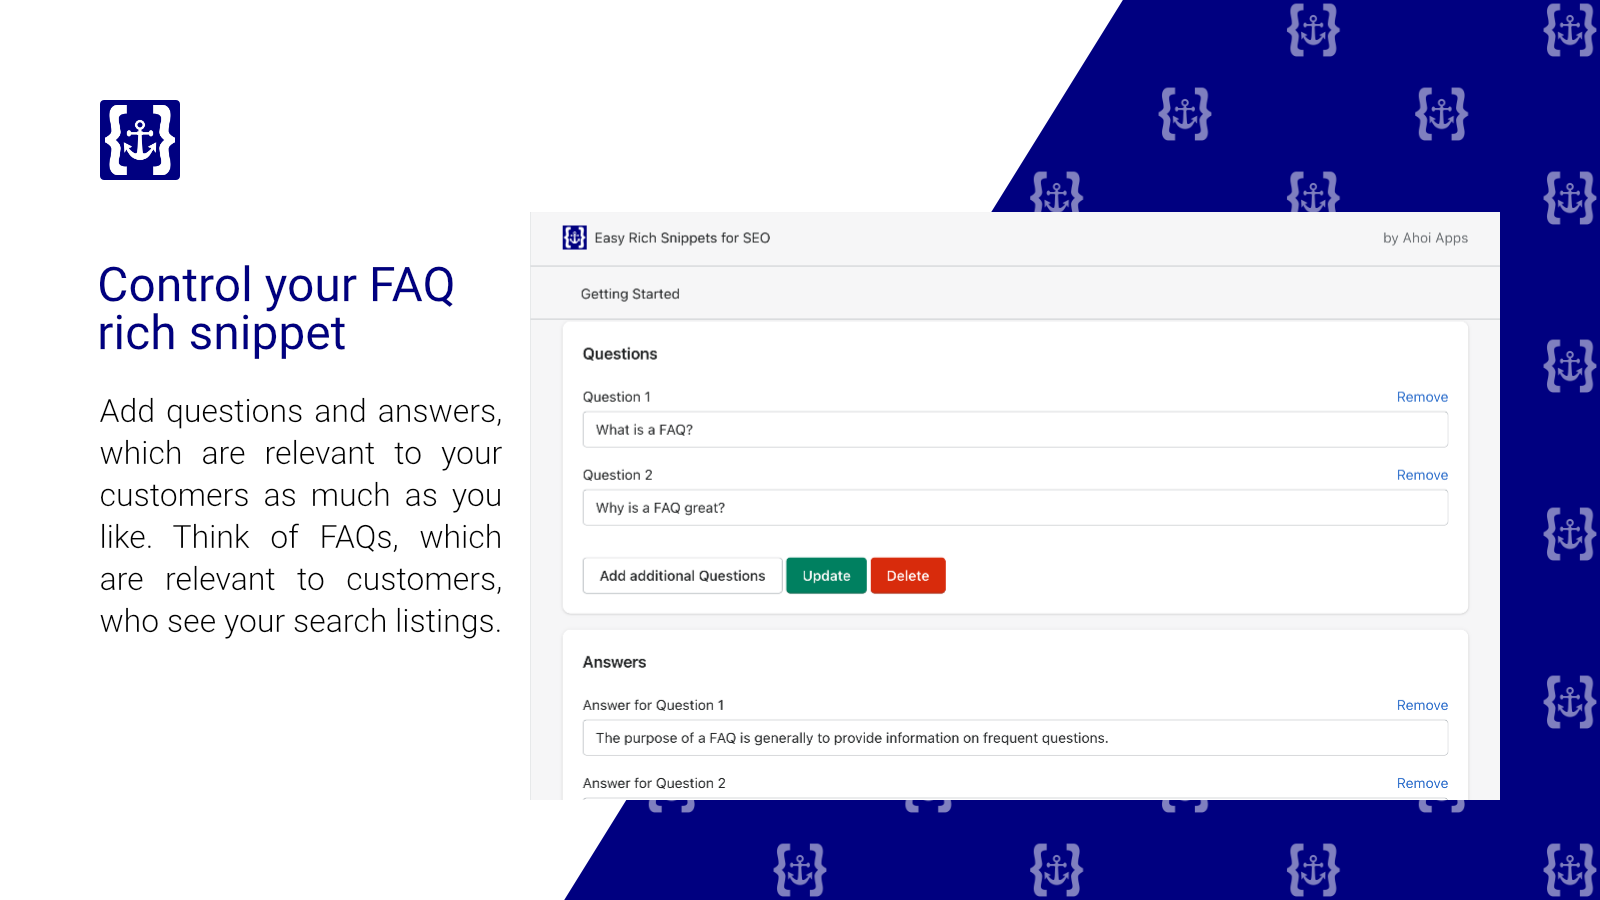 Easy Rich Snippet FAQ Details. Control your FAQ search listings.